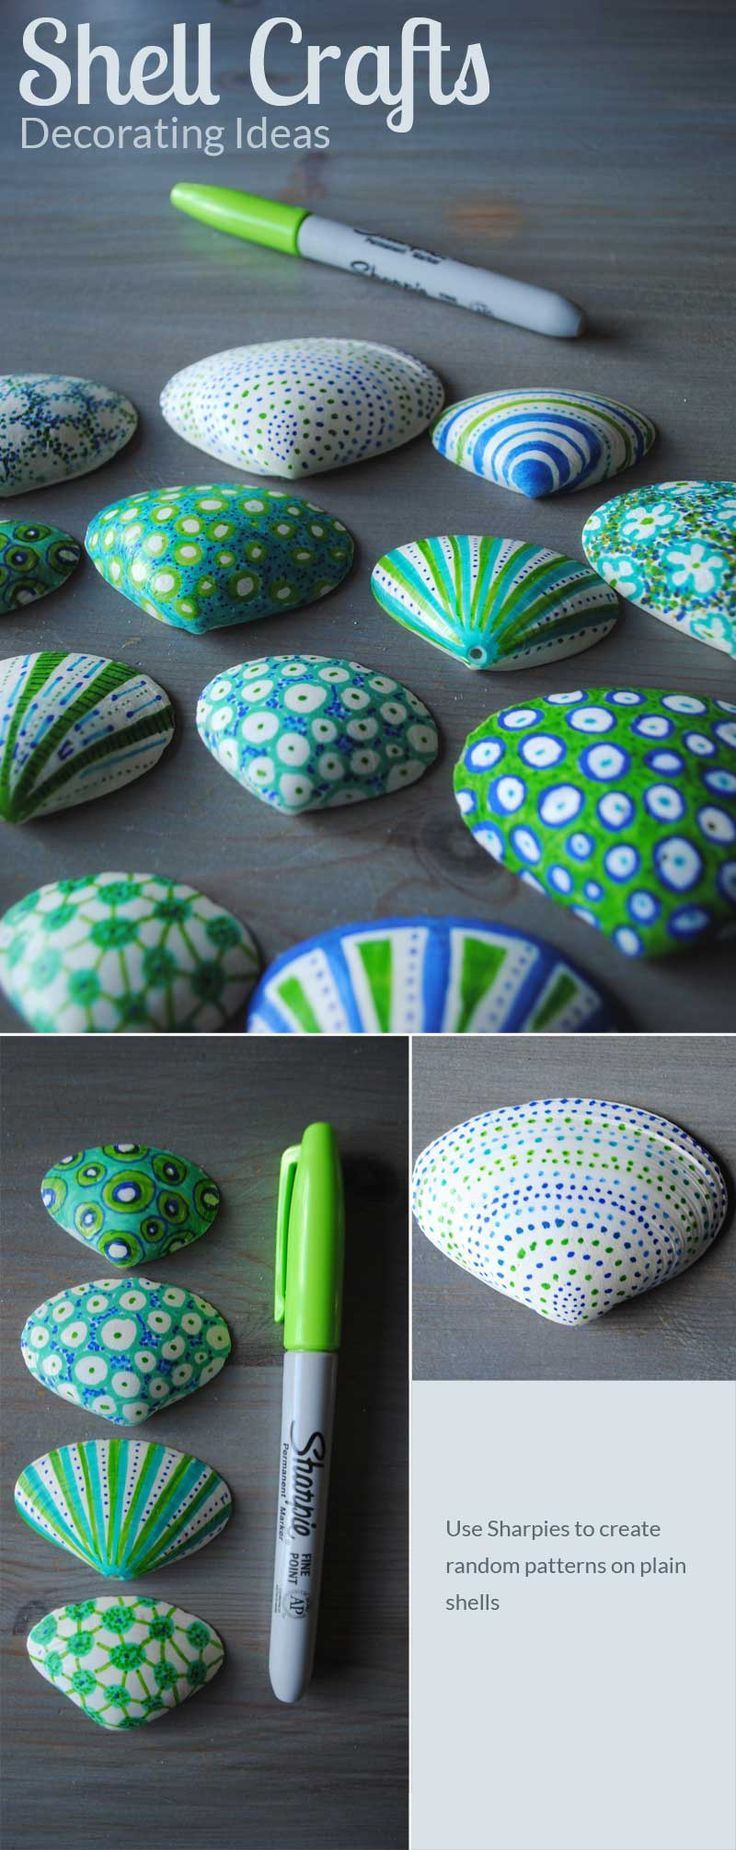 Decorated shells from Vacation -   19 beach shell crafts
 ideas